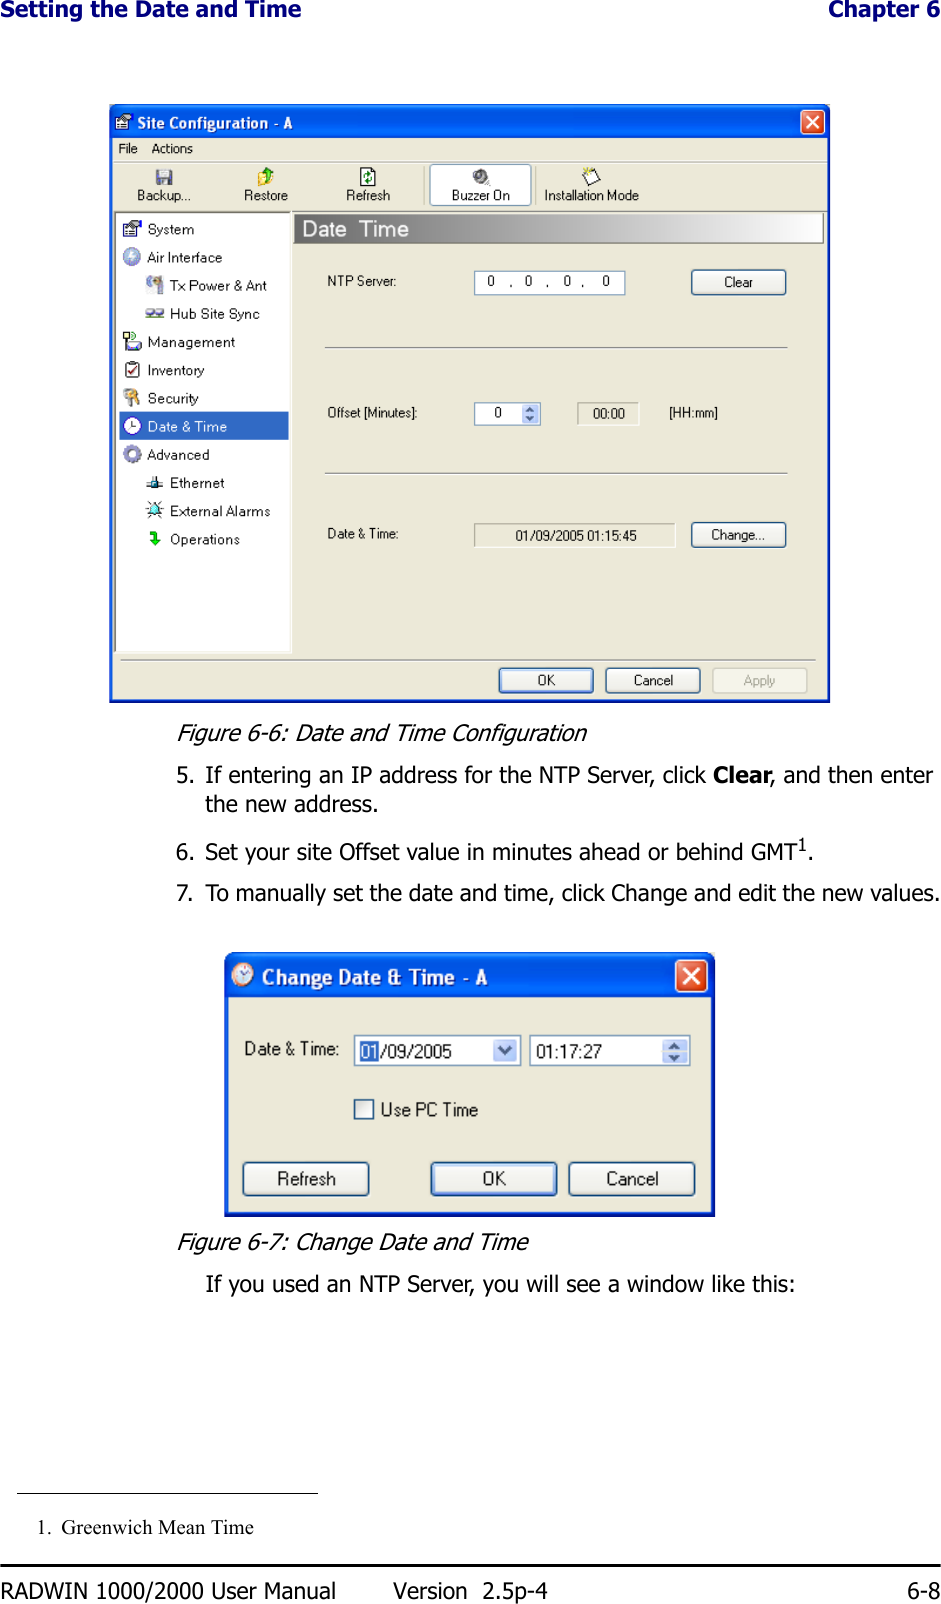 Setting the Date and Time  Chapter 6RADWIN 1000/2000 User Manual Version  2.5p-4 6-8Figure 6-6: Date and Time Configuration5. If entering an IP address for the NTP Server, click Clear, and then enter the new address.6. Set your site Offset value in minutes ahead or behind GMT1.7. To manually set the date and time, click Change and edit the new values.Figure 6-7: Change Date and Time If you used an NTP Server, you will see a window like this:1. Greenwich Mean Time